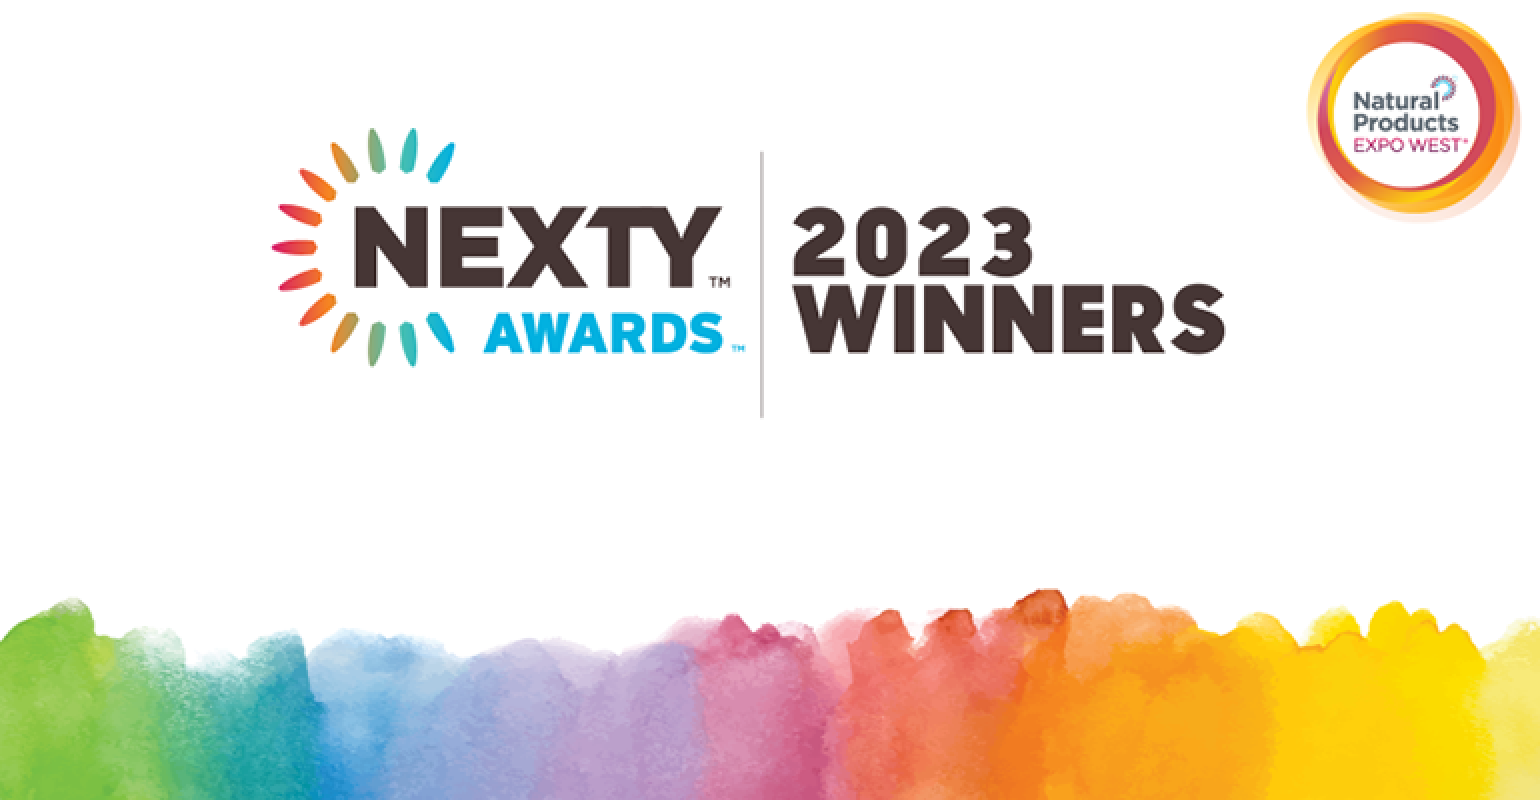 Meet the 2023 natural products NEXTY award winners Supermarket News